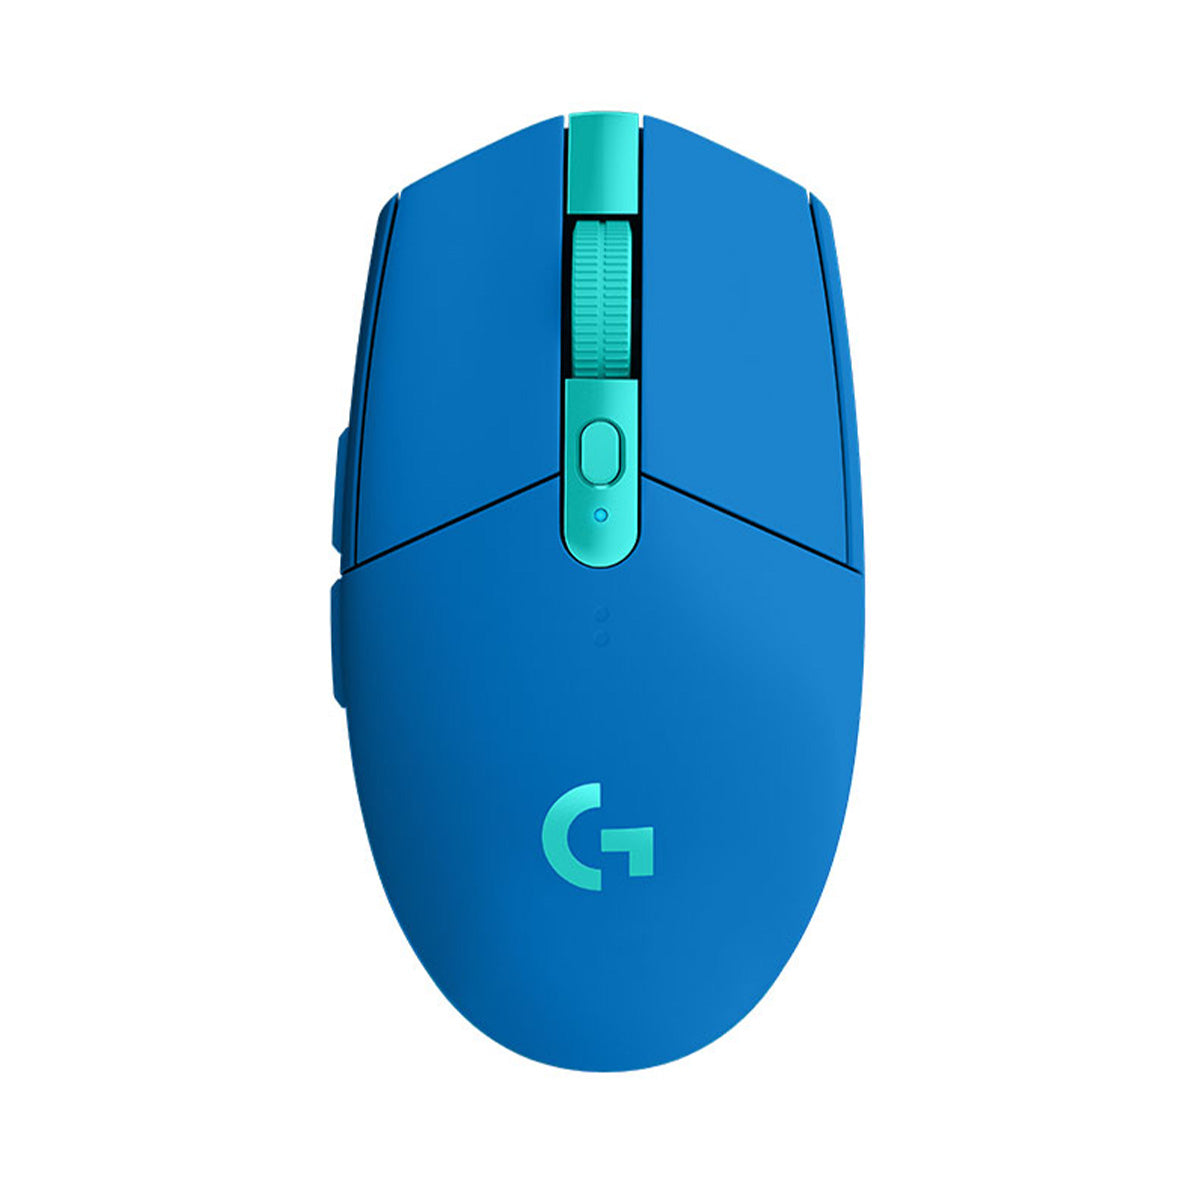 Logitech G305 LIGHTSPEED Wireless Gaming Mouse - Blue – Ghostly Engines